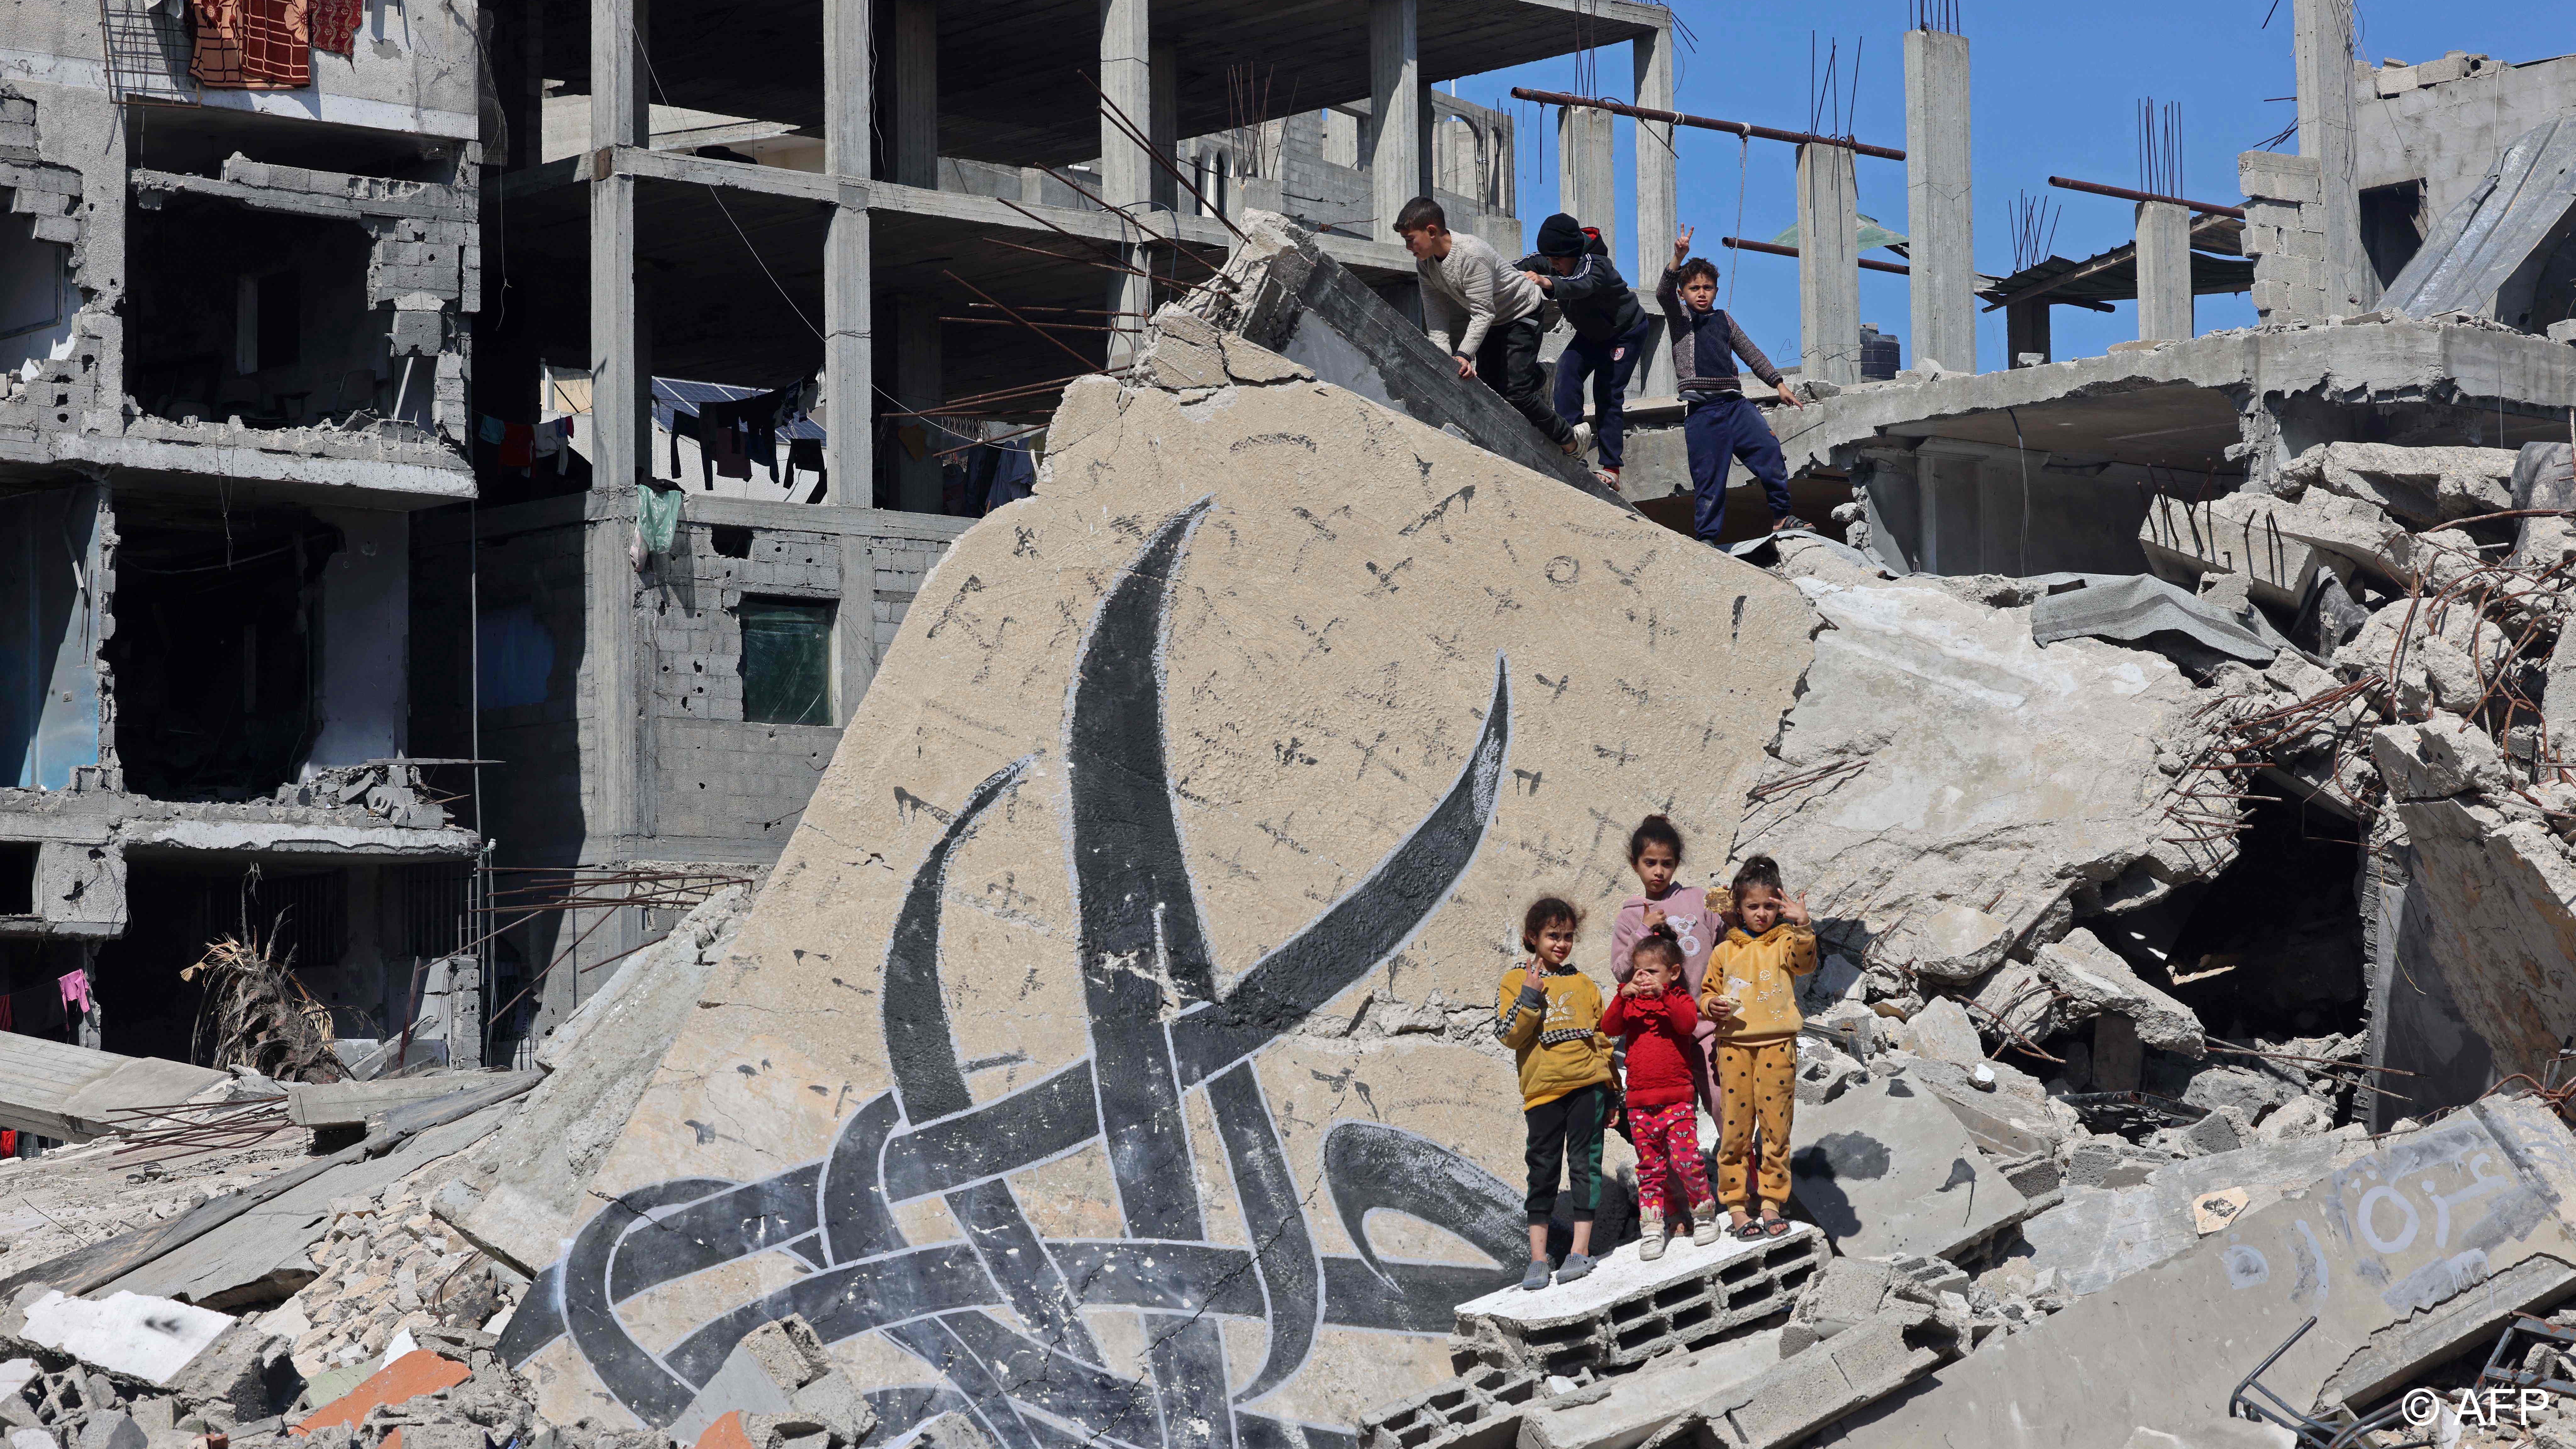 Palestinian children clamber on the ruins of buildings in Gaza following recent Israeli strikes